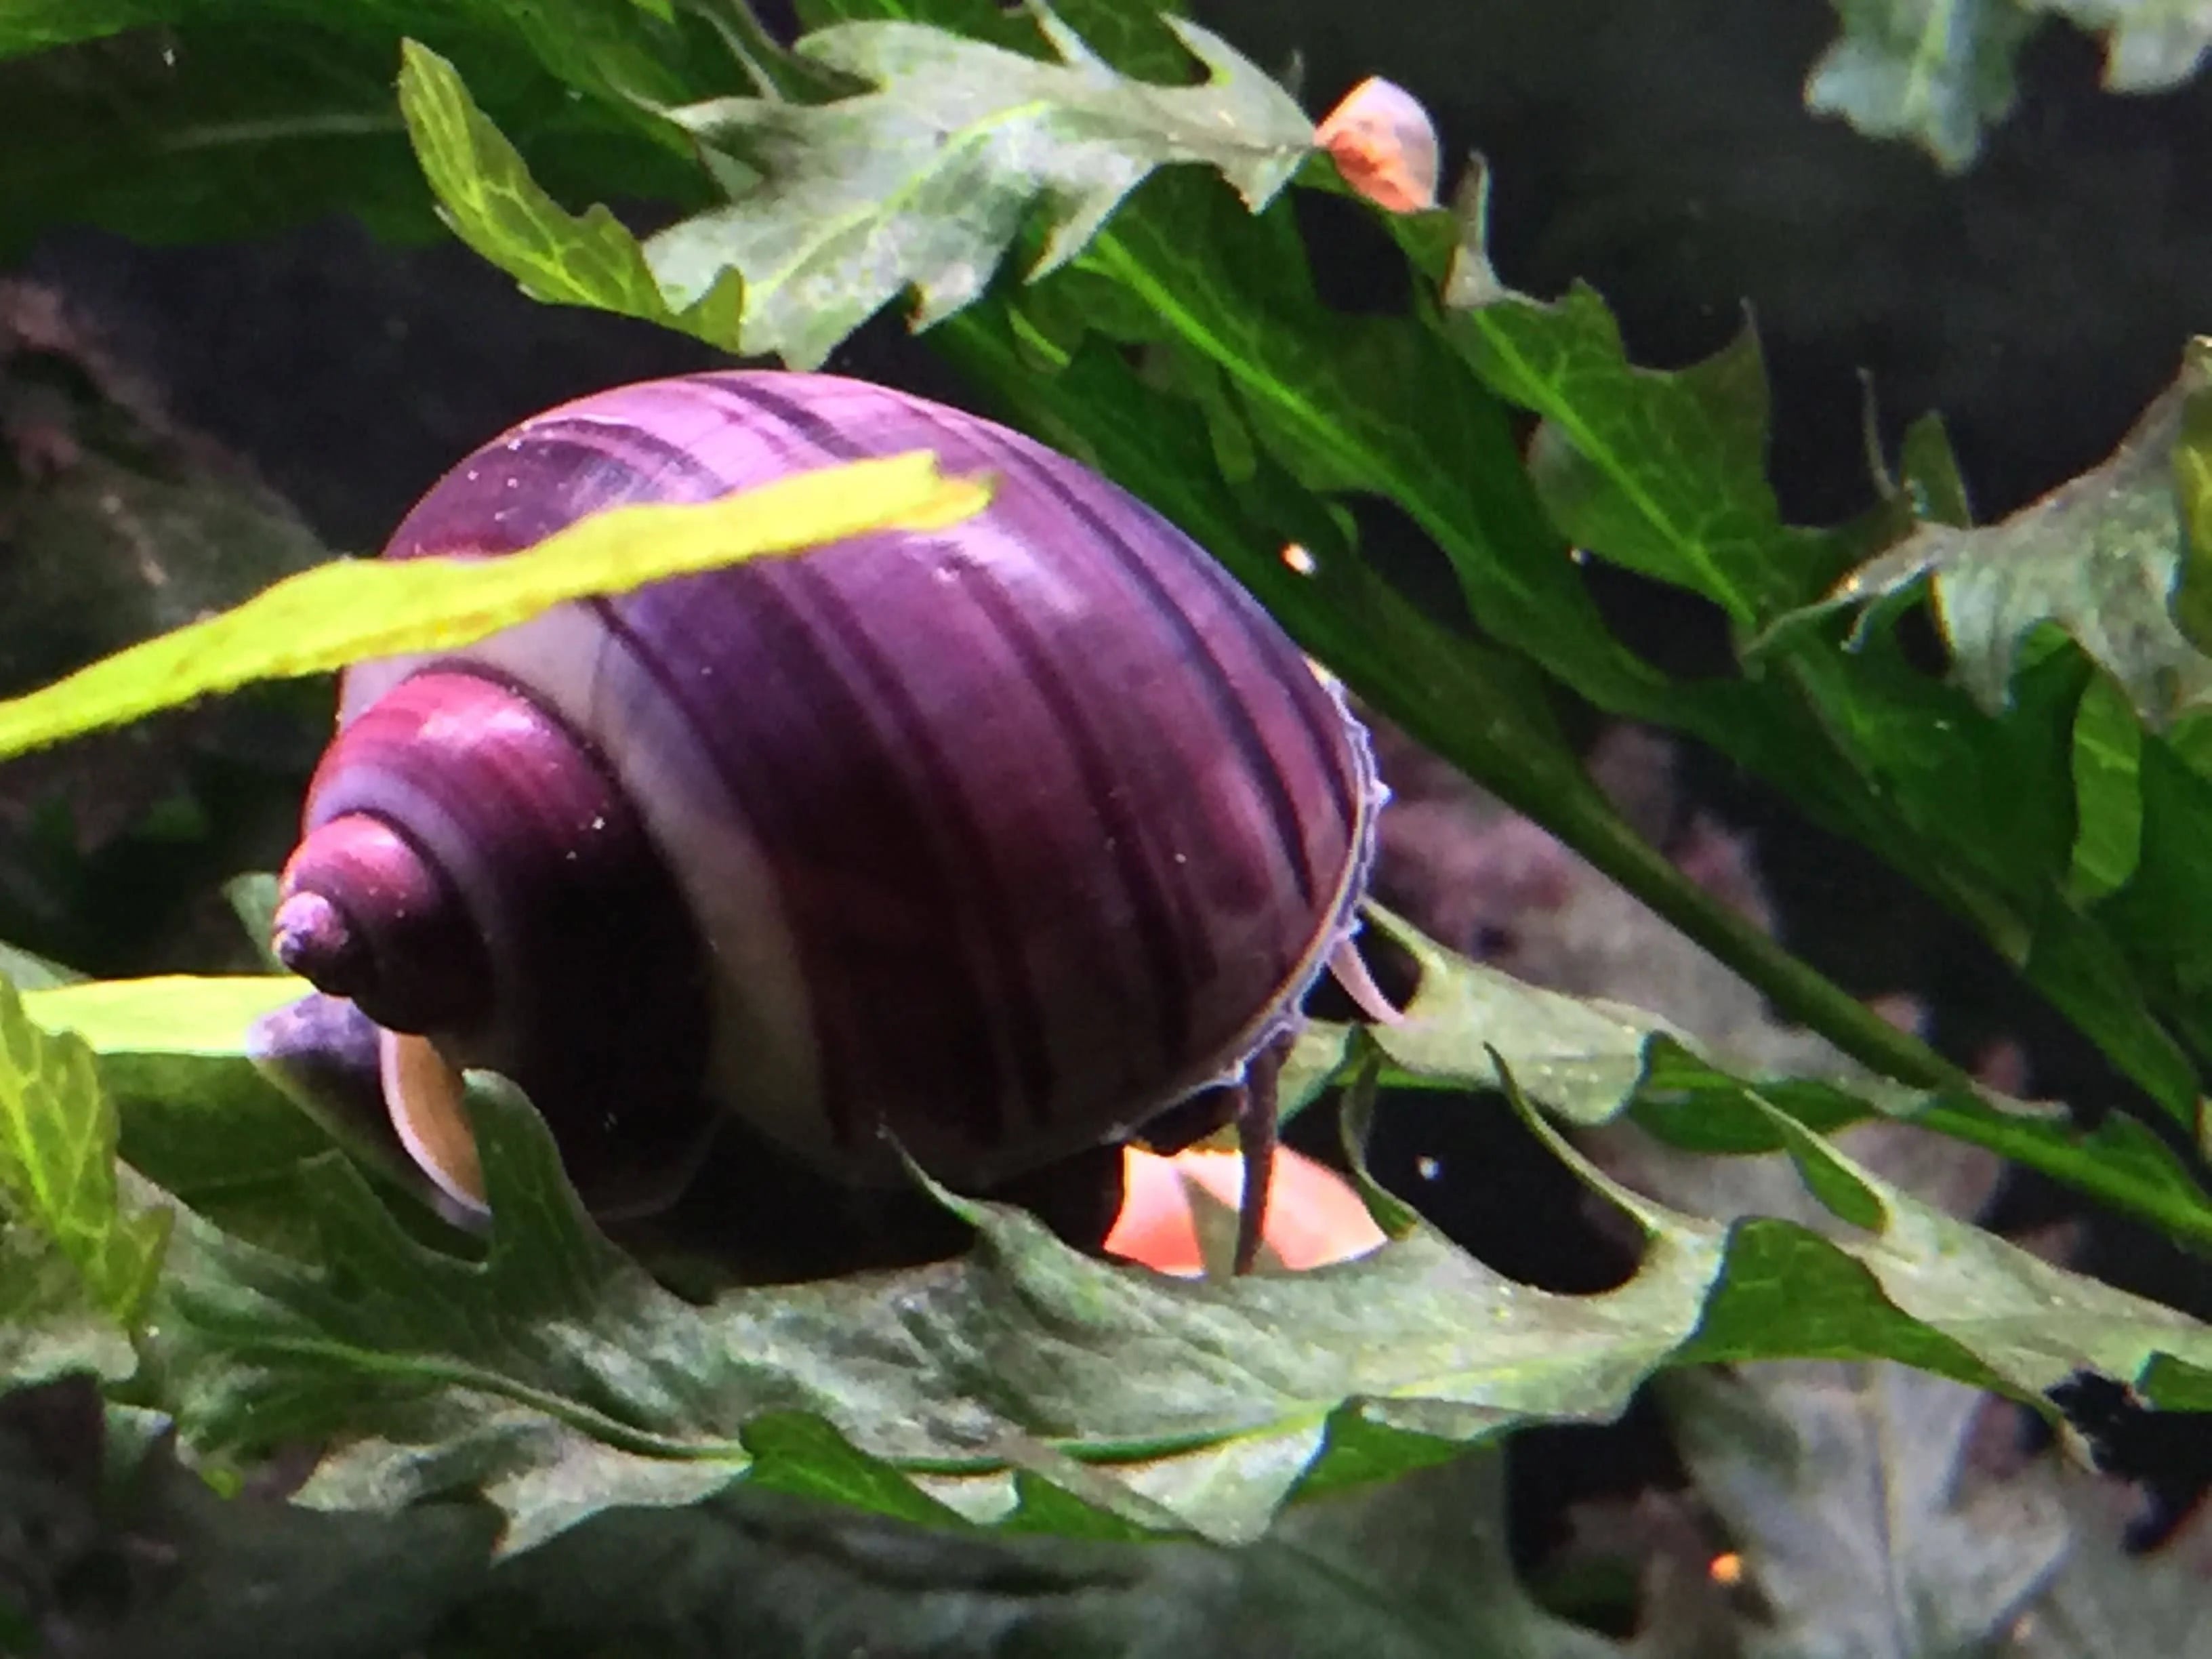 Mystery Snail Package